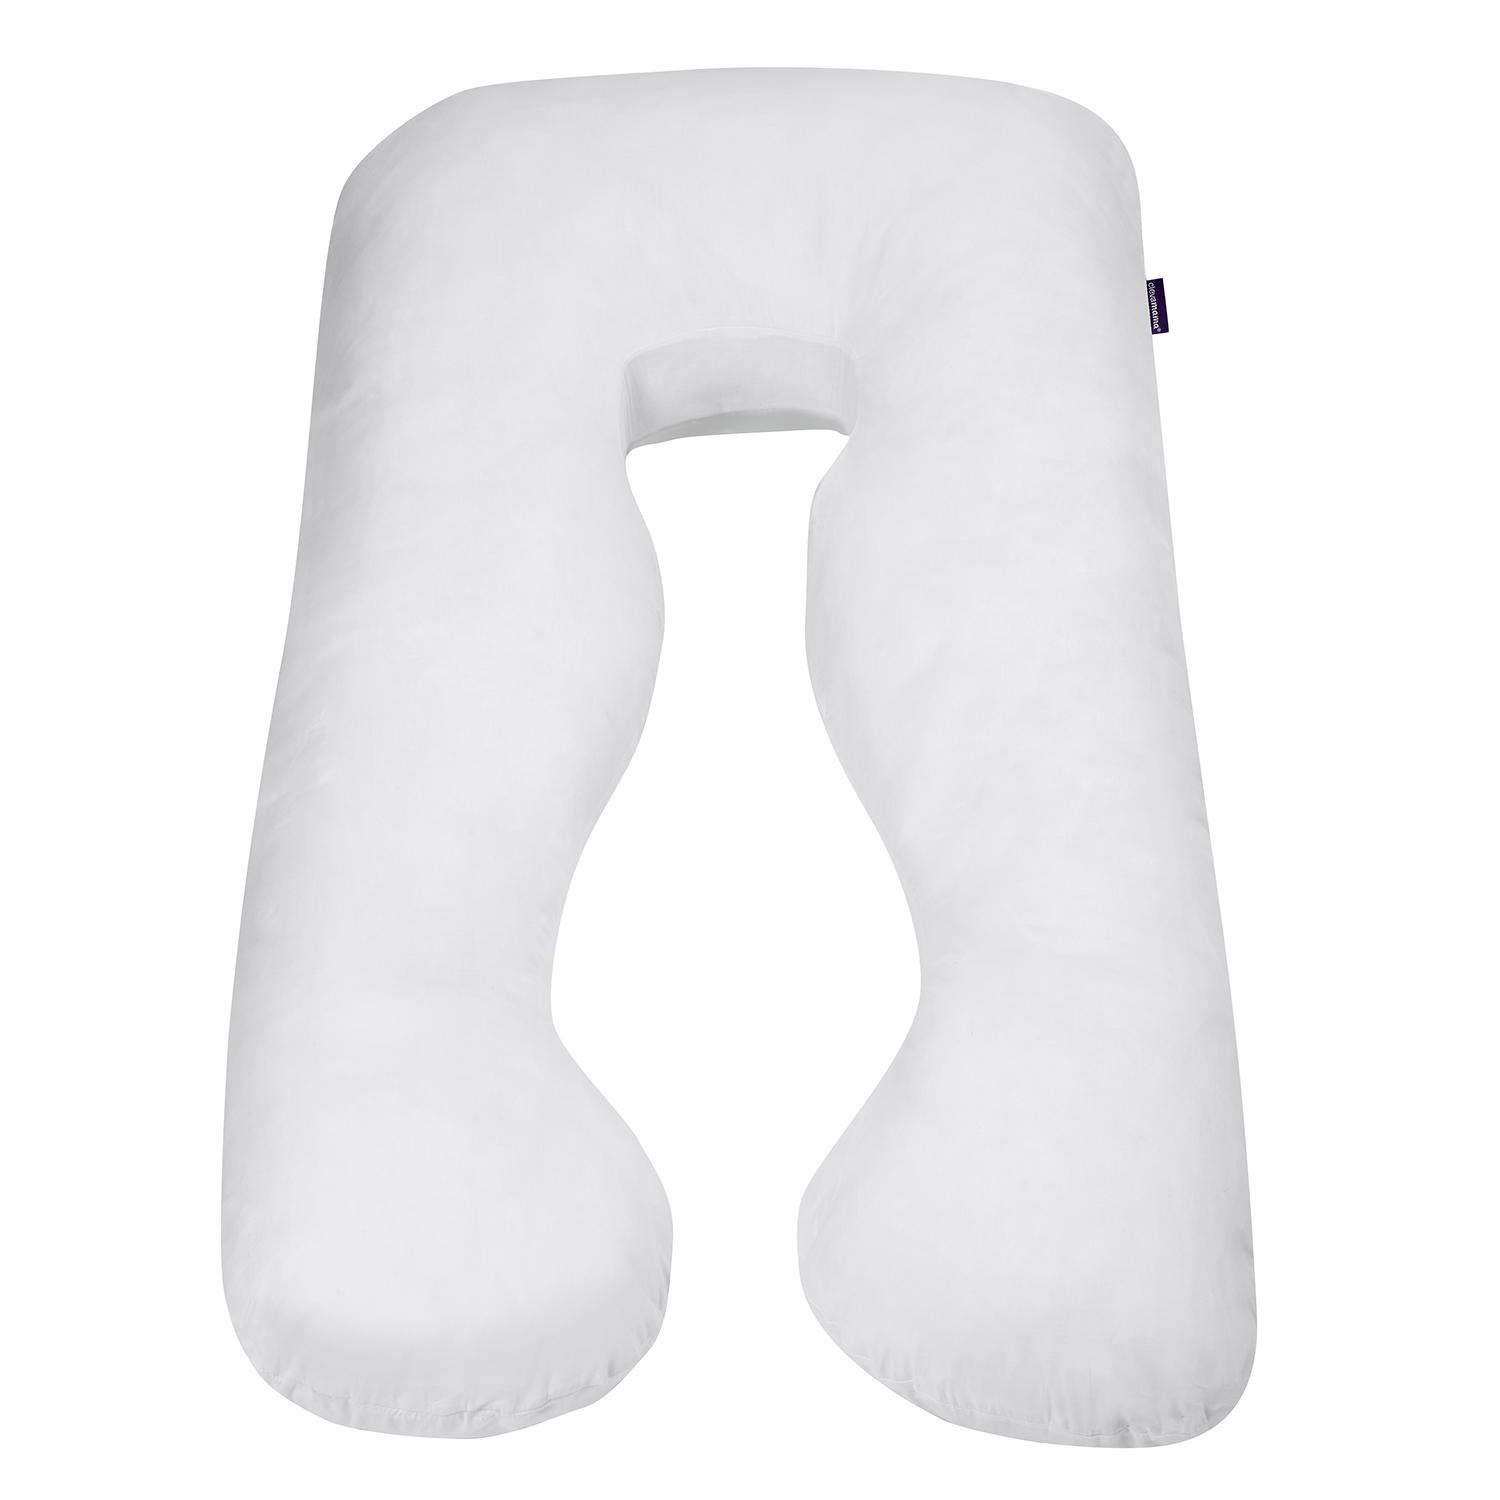 Therapueutic Body Pillow 3207